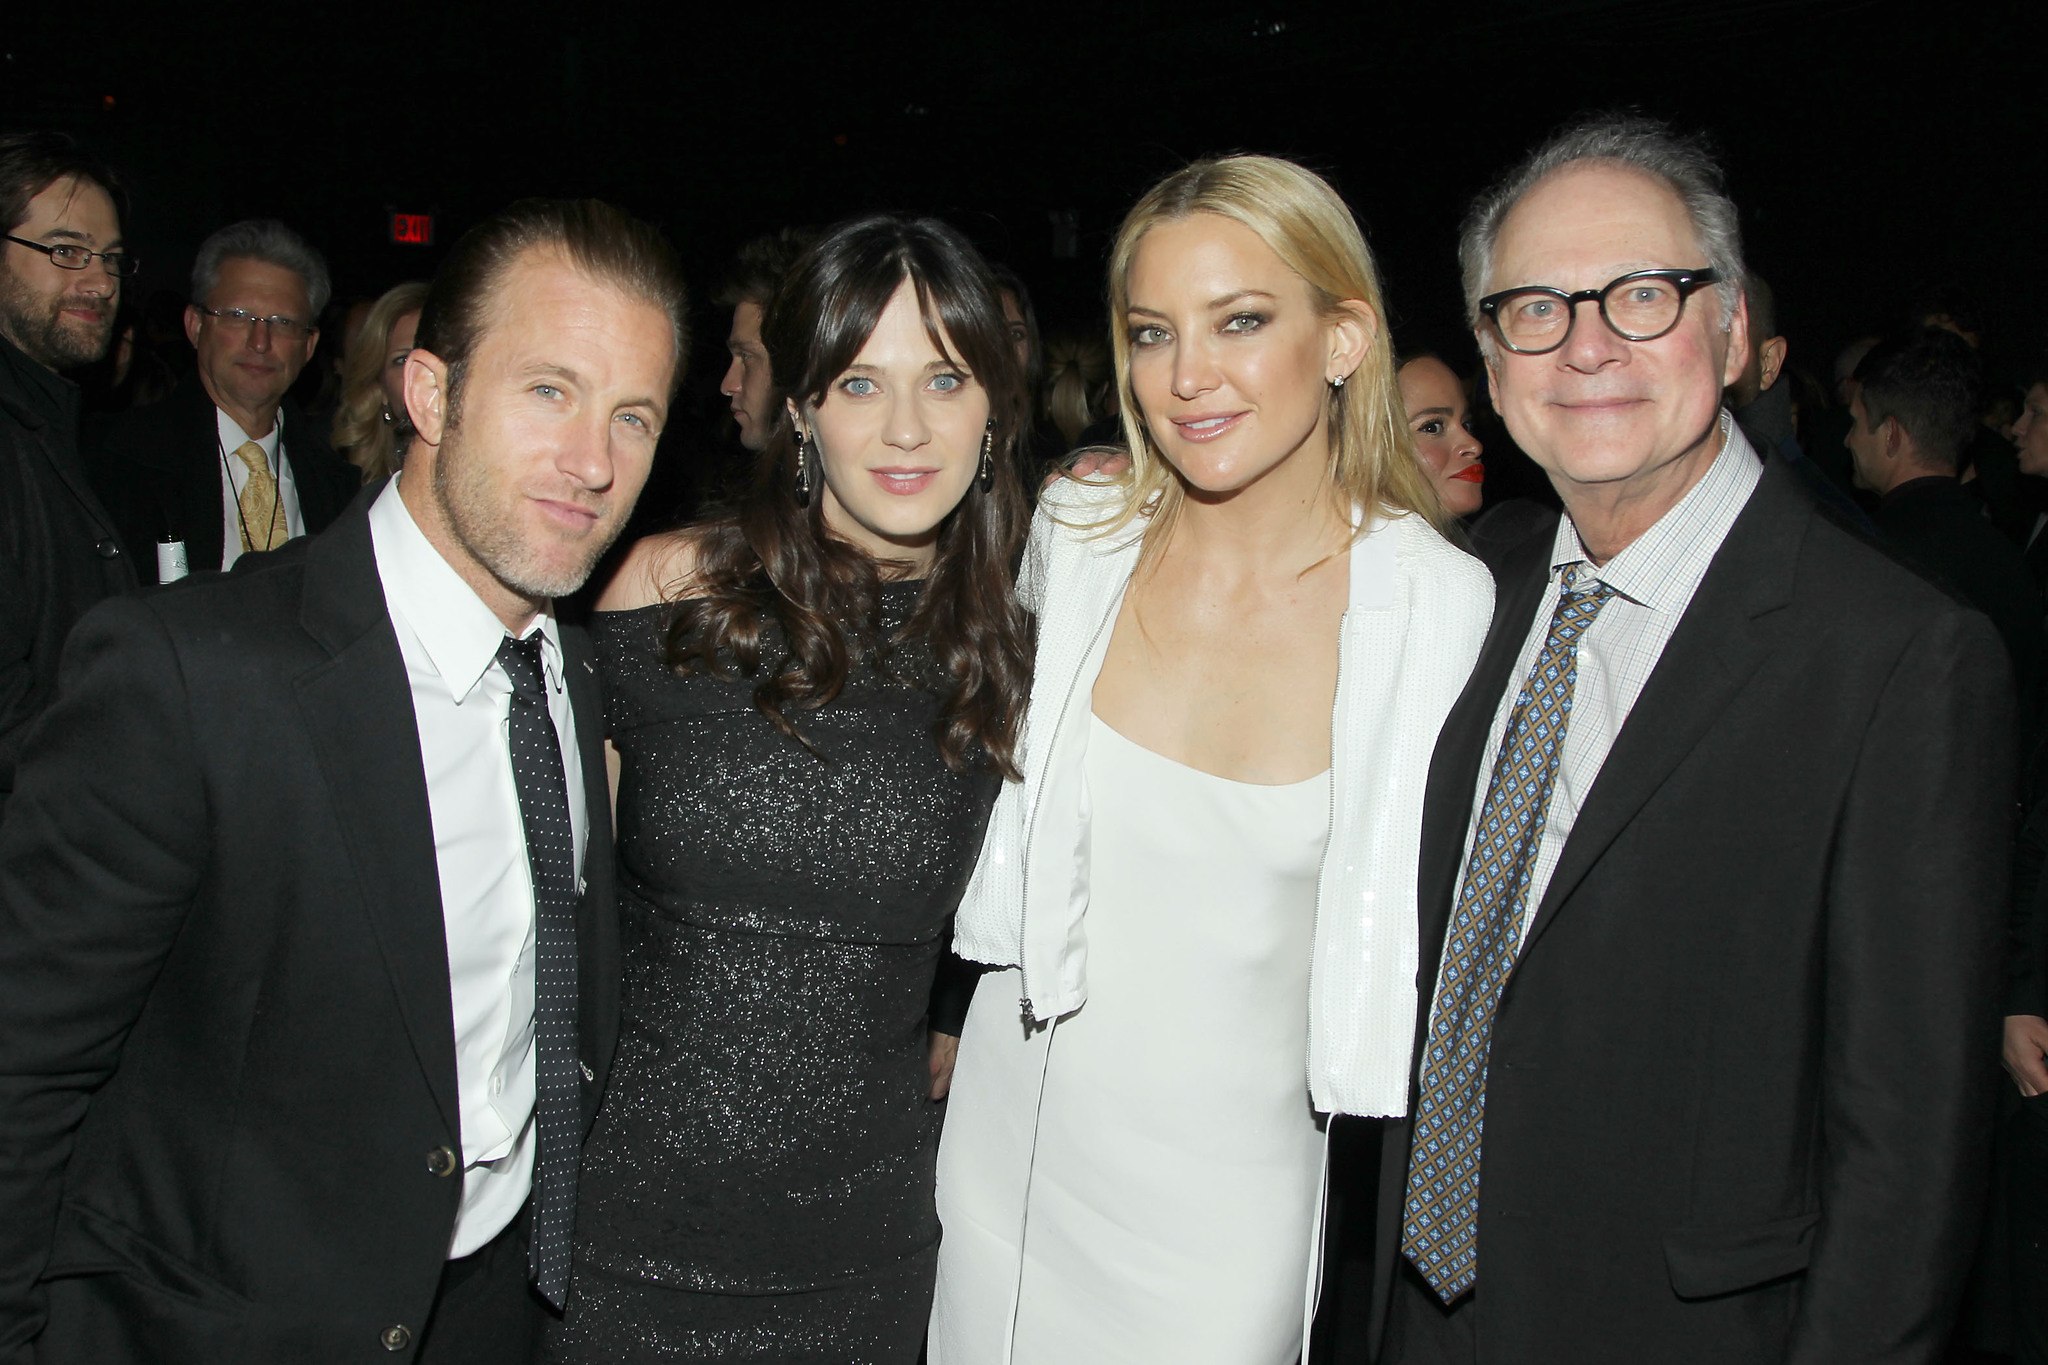 Barry Levinson, Scott Caan, Kate Hudson and Zooey Deschanel at event of Rock the Kasbah (2015)